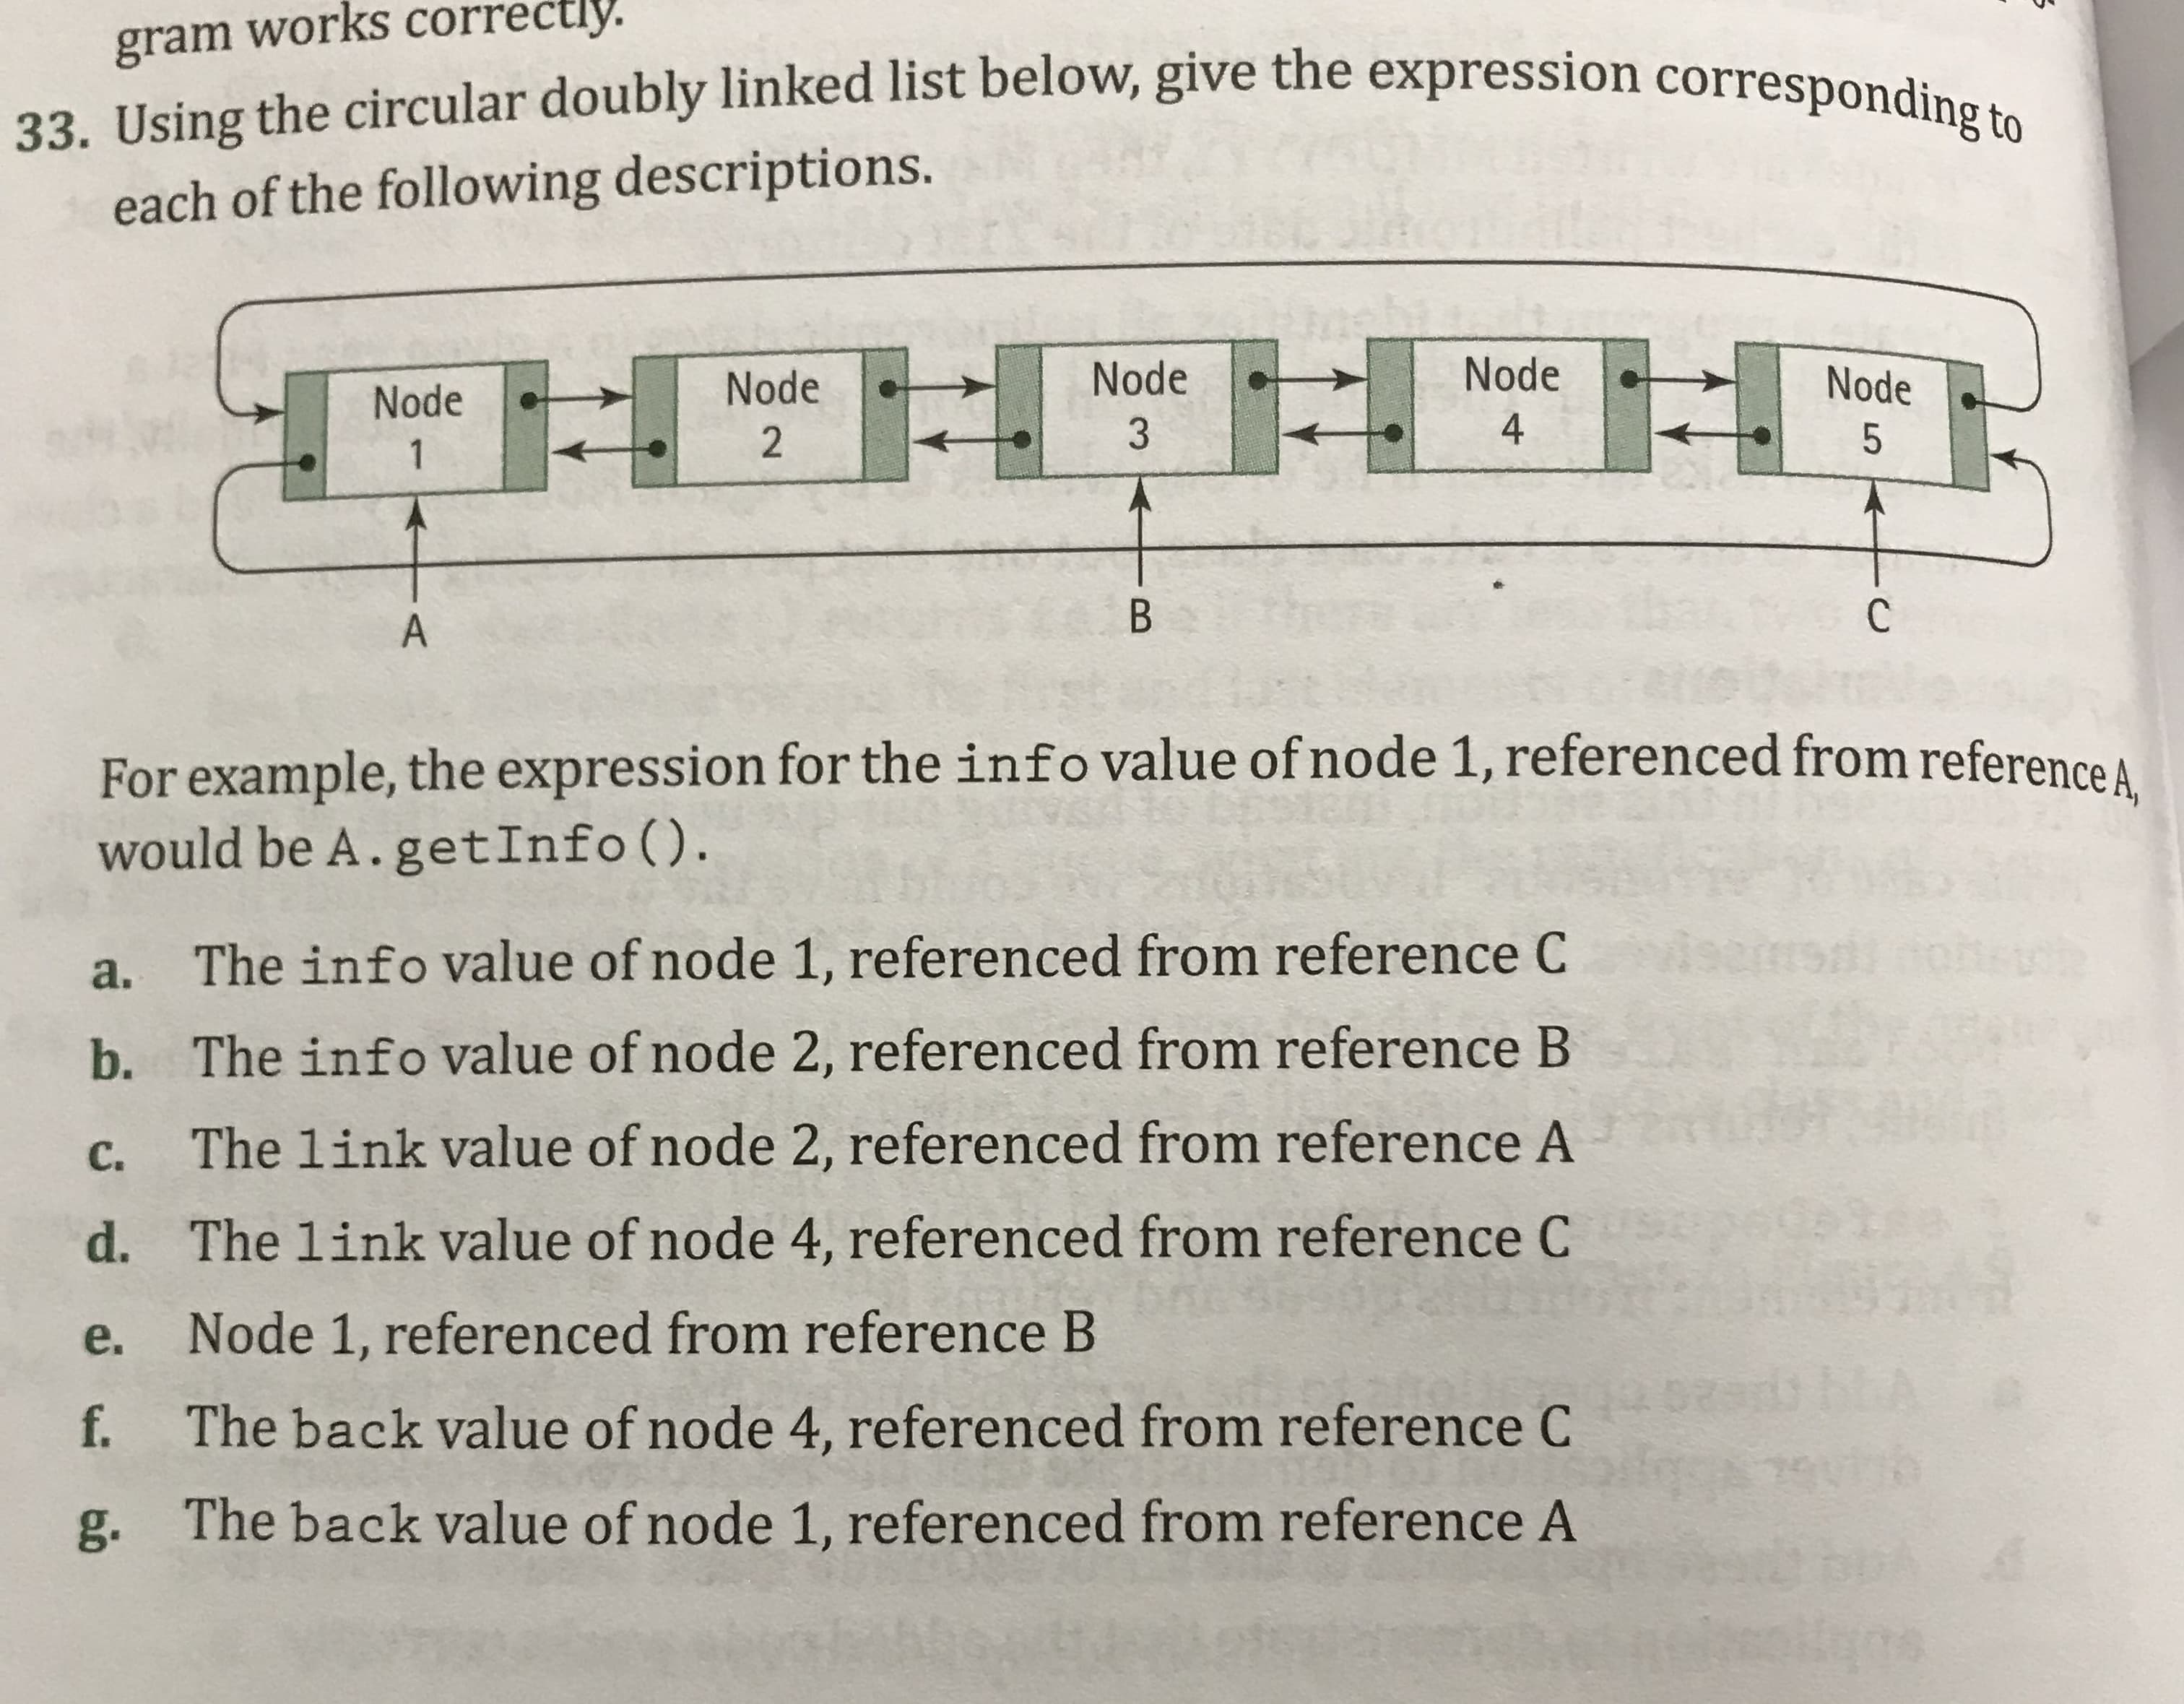 gram works correctly.
33. Using the circular doubly linked list below, give the expression corresponding to
each of the following descriptions.
TH HHF
Node
Node
Node
Node
Node
2
3
4
1
A
For example, the expression for the info value of node 1, referenced from reference A
would be A.getInfo().
a.
The info value of node 1, referenced from reference Cs
b. The info value of node 2, referenced from reference B
C.
The link value of node 2, referenced from reference A
d. The link value of node 4, referenced from reference C
e.
Node 1, referenced from reference B
f.
The back value of node 4, referenced from reference C
79v16
g. The back value of node 1, referenced from reference A
